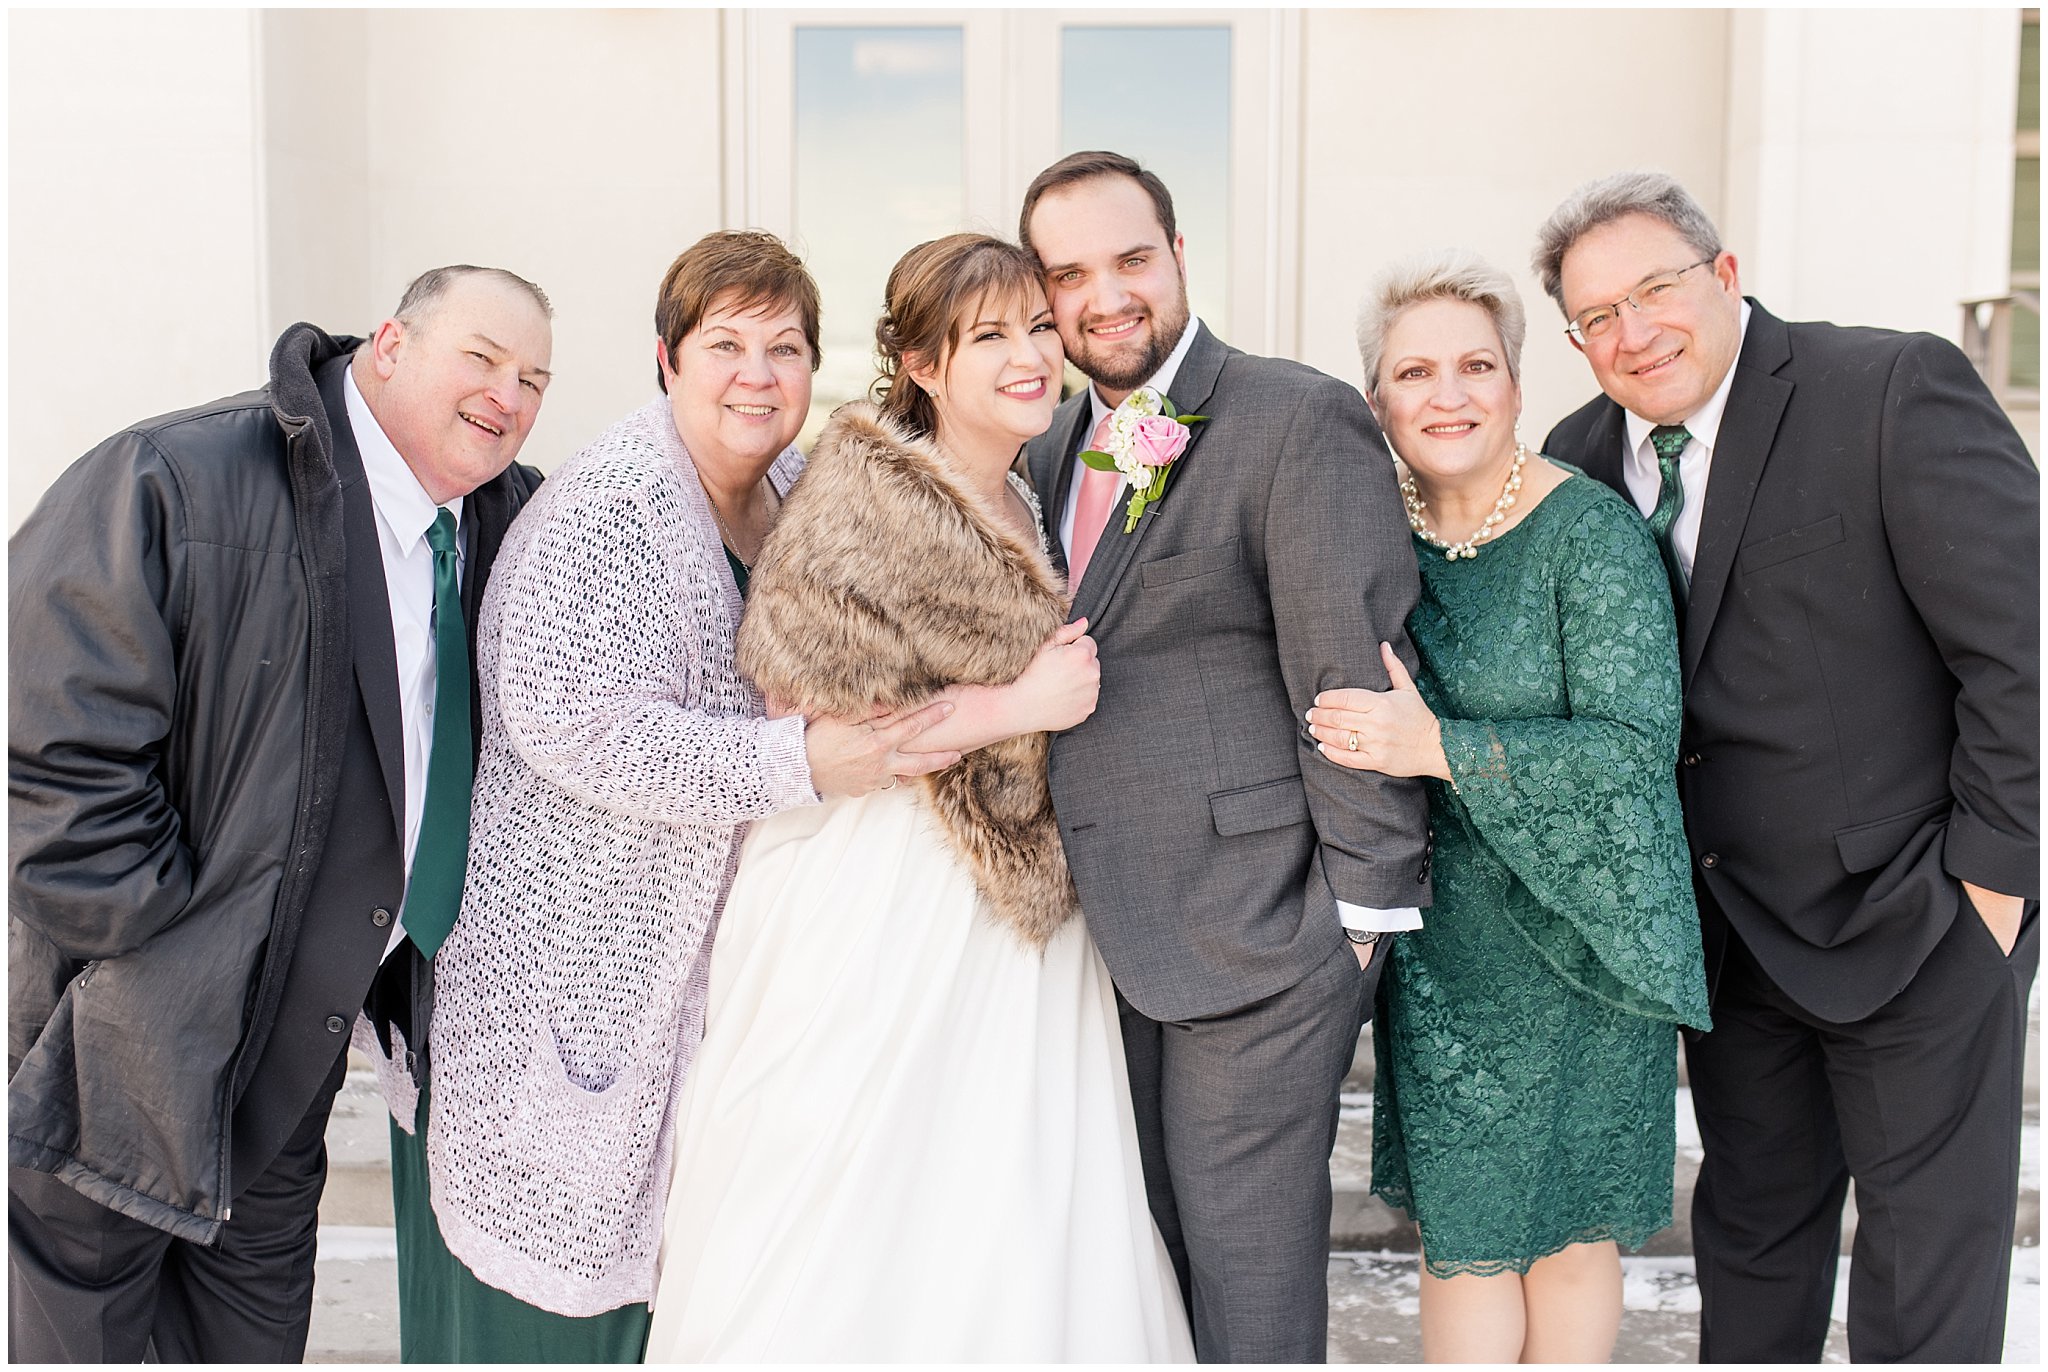 Bride and groom with parents | Ogden Temple Wedding | Jessie and Dallin Photography